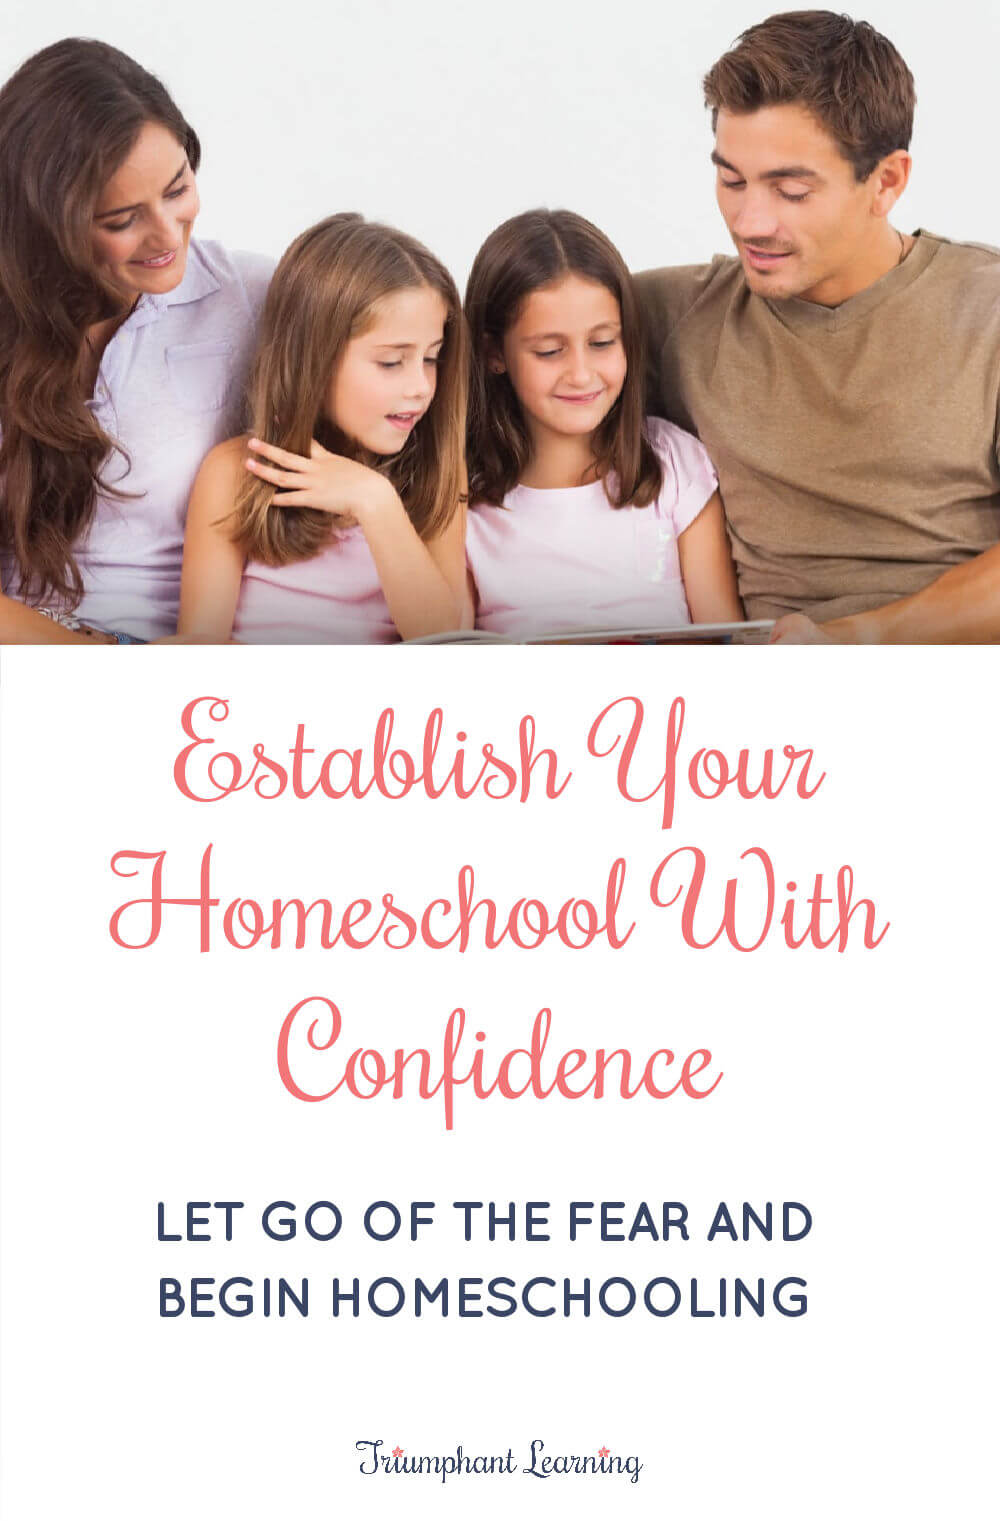 Let go of the fear and take your first step to begin homeschooling. You are your child's best teacher! via @TriLearning